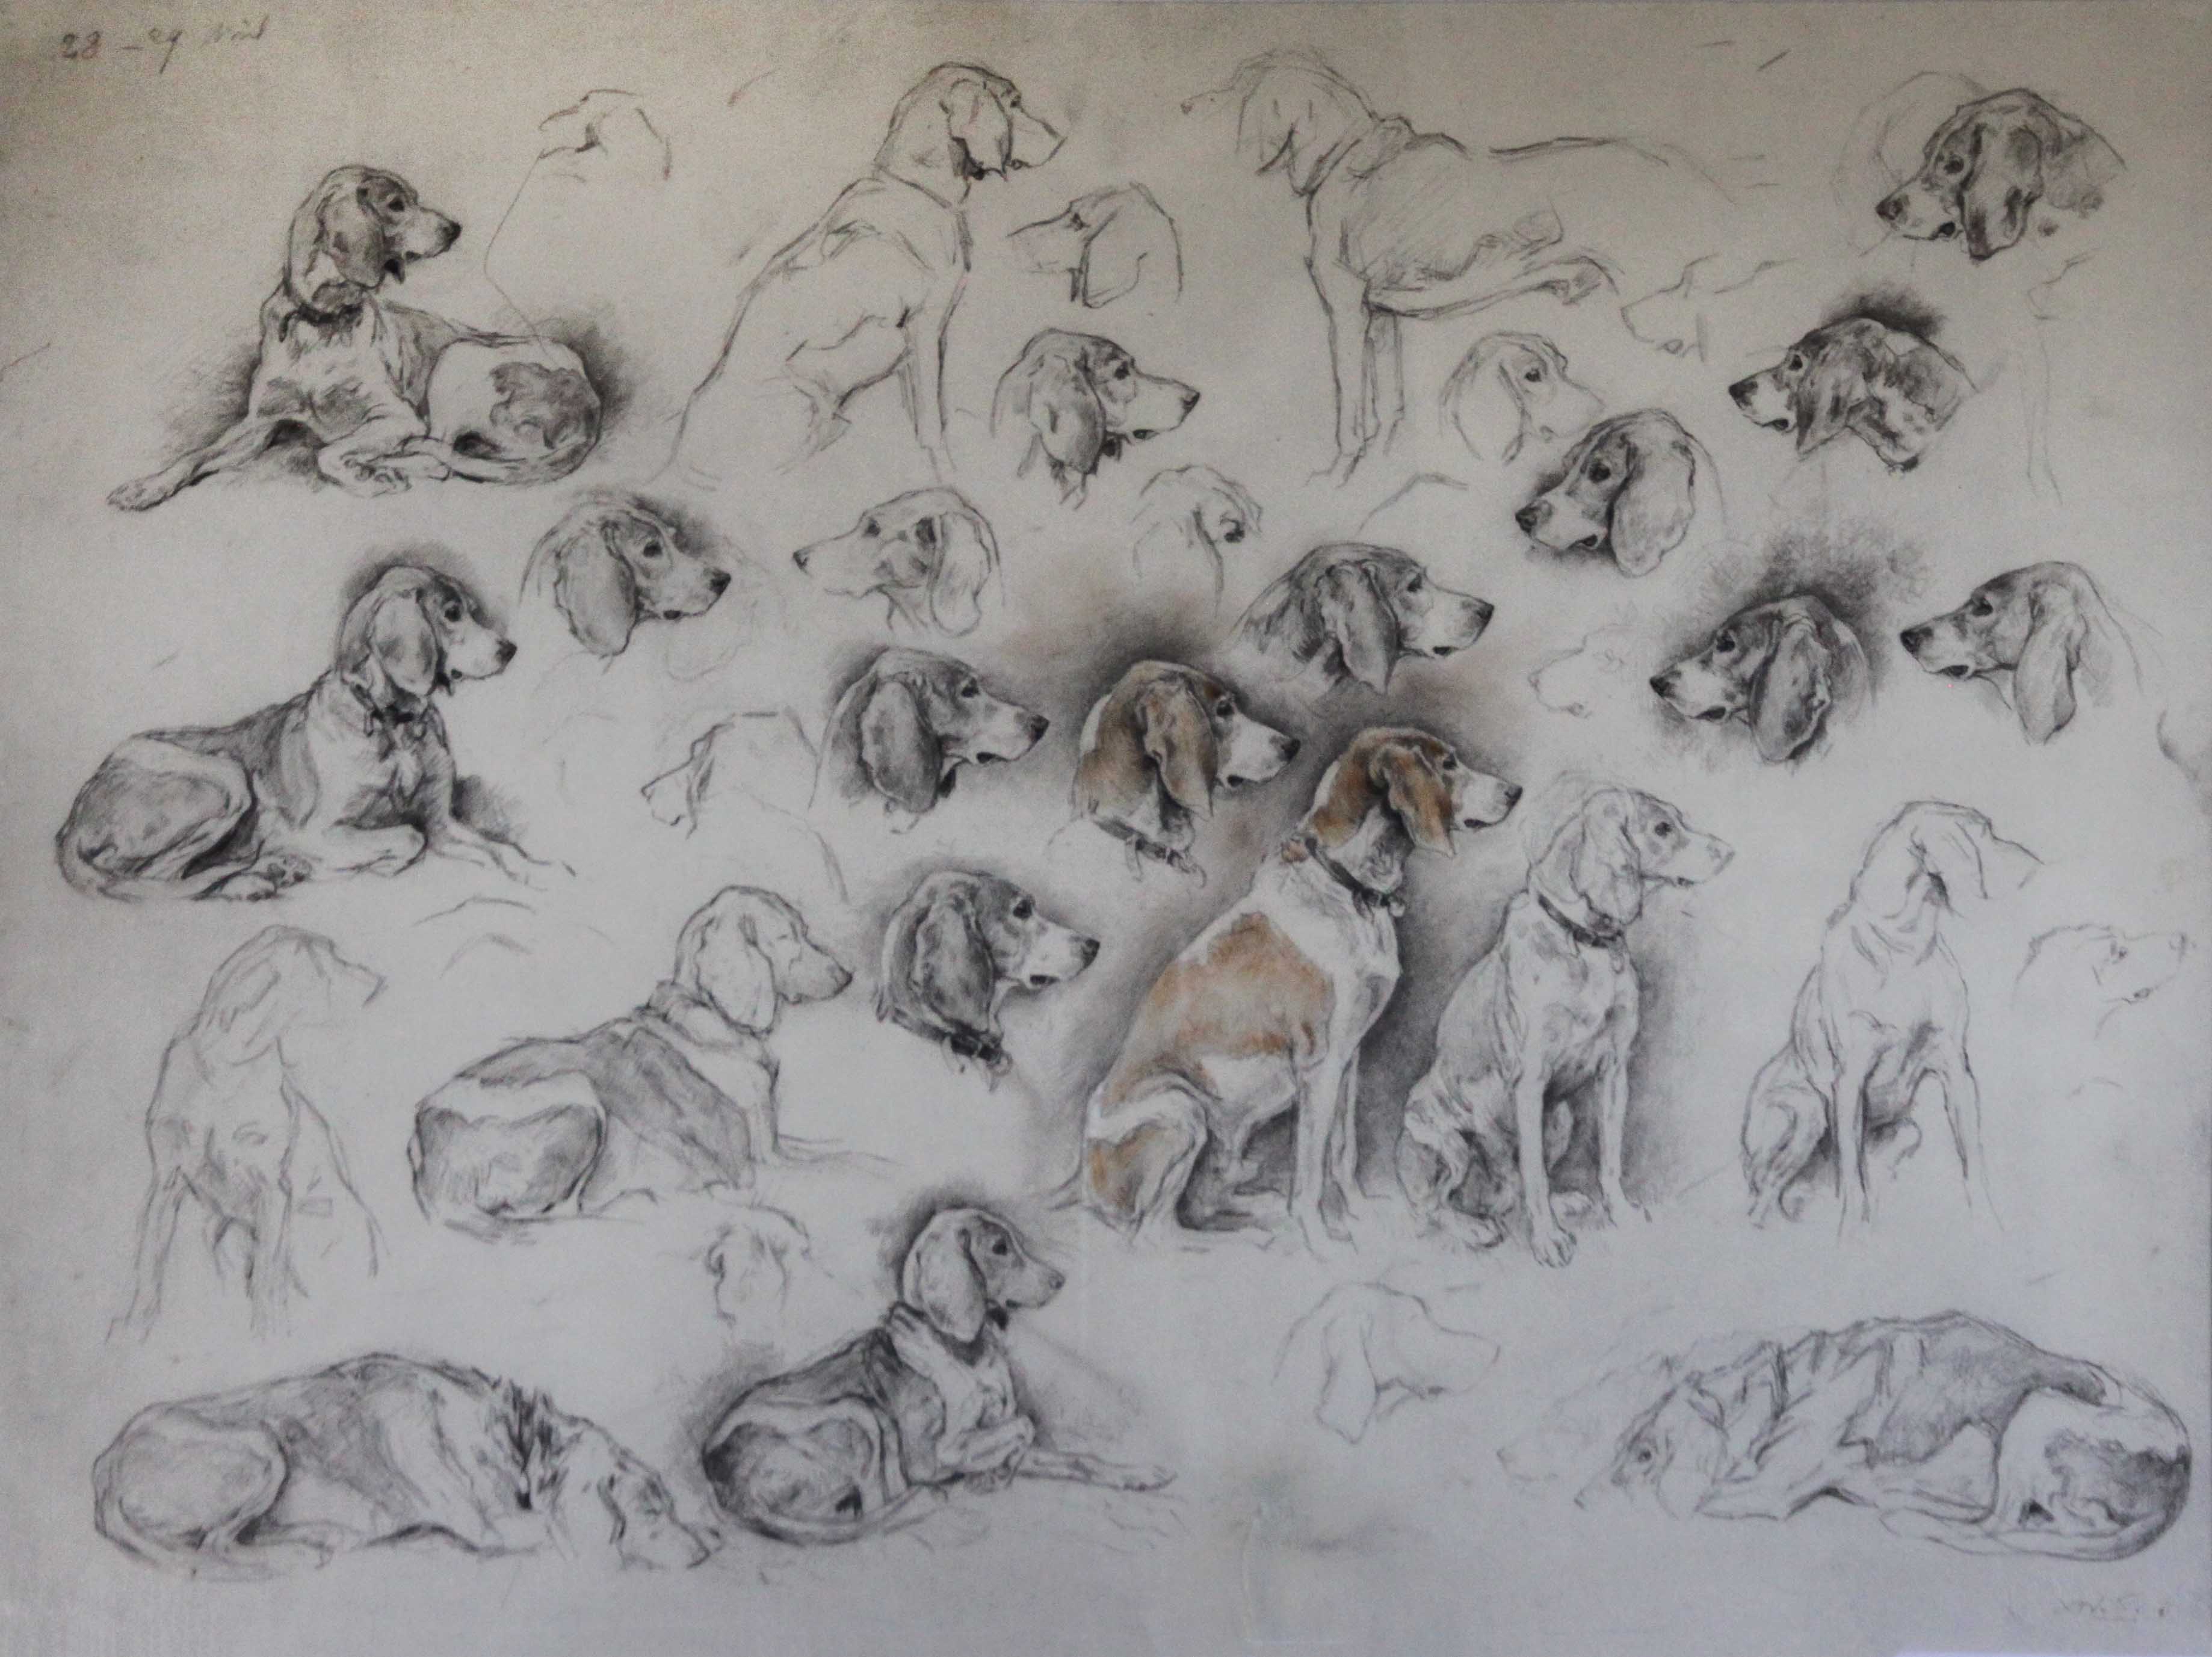 Click to see full size: “Chien de Meute”, French hunting hounds pencil with watercolour drawing by Xavier de Poret (French, 1894 - 1975)- “Chien de Meute”, French hunting hounds pencil with watercolour drawing by Xavier de Poret (French, 1894 - 1975)